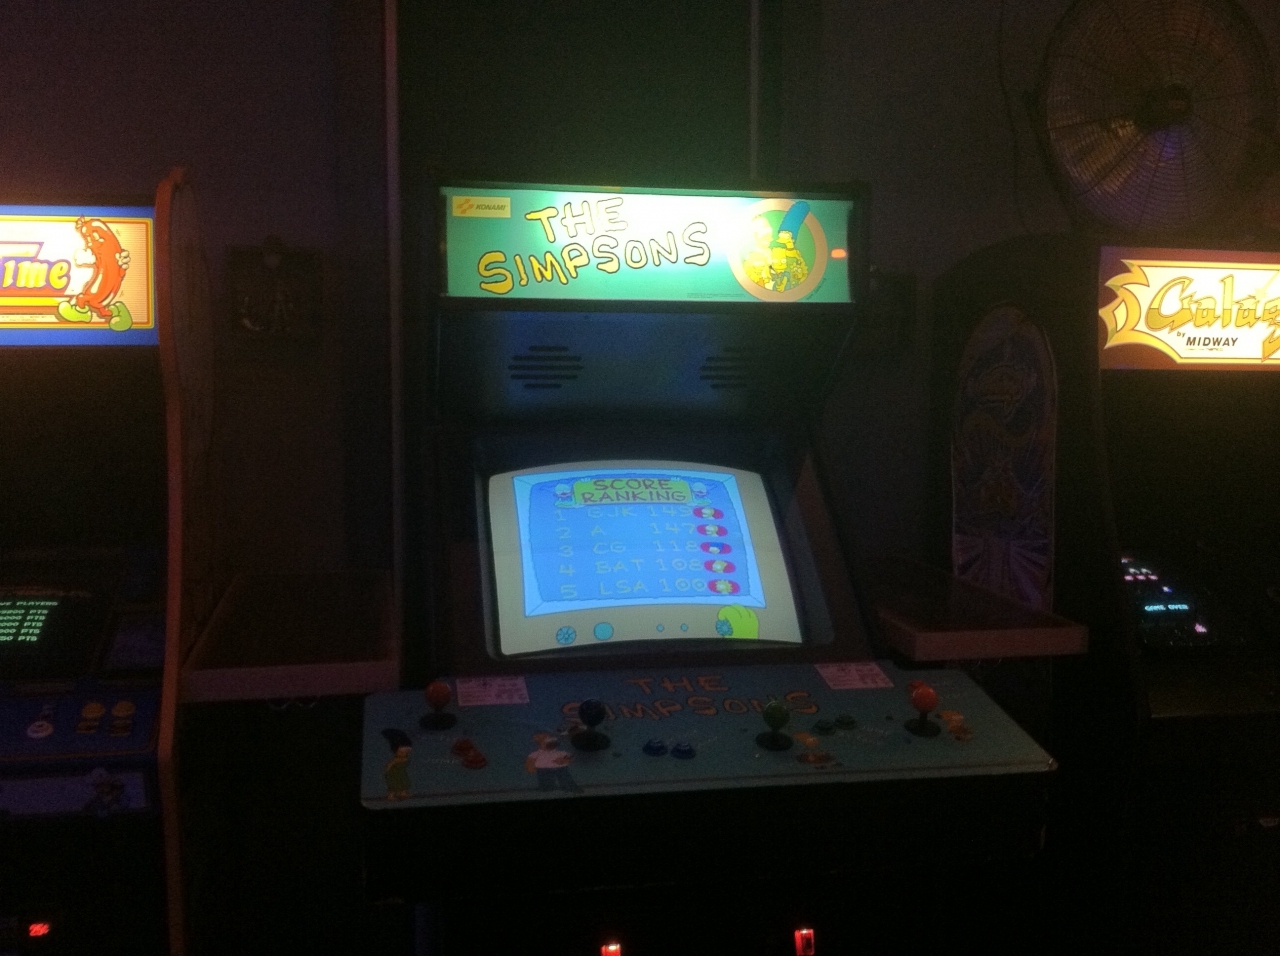 THe simpsons arcade game